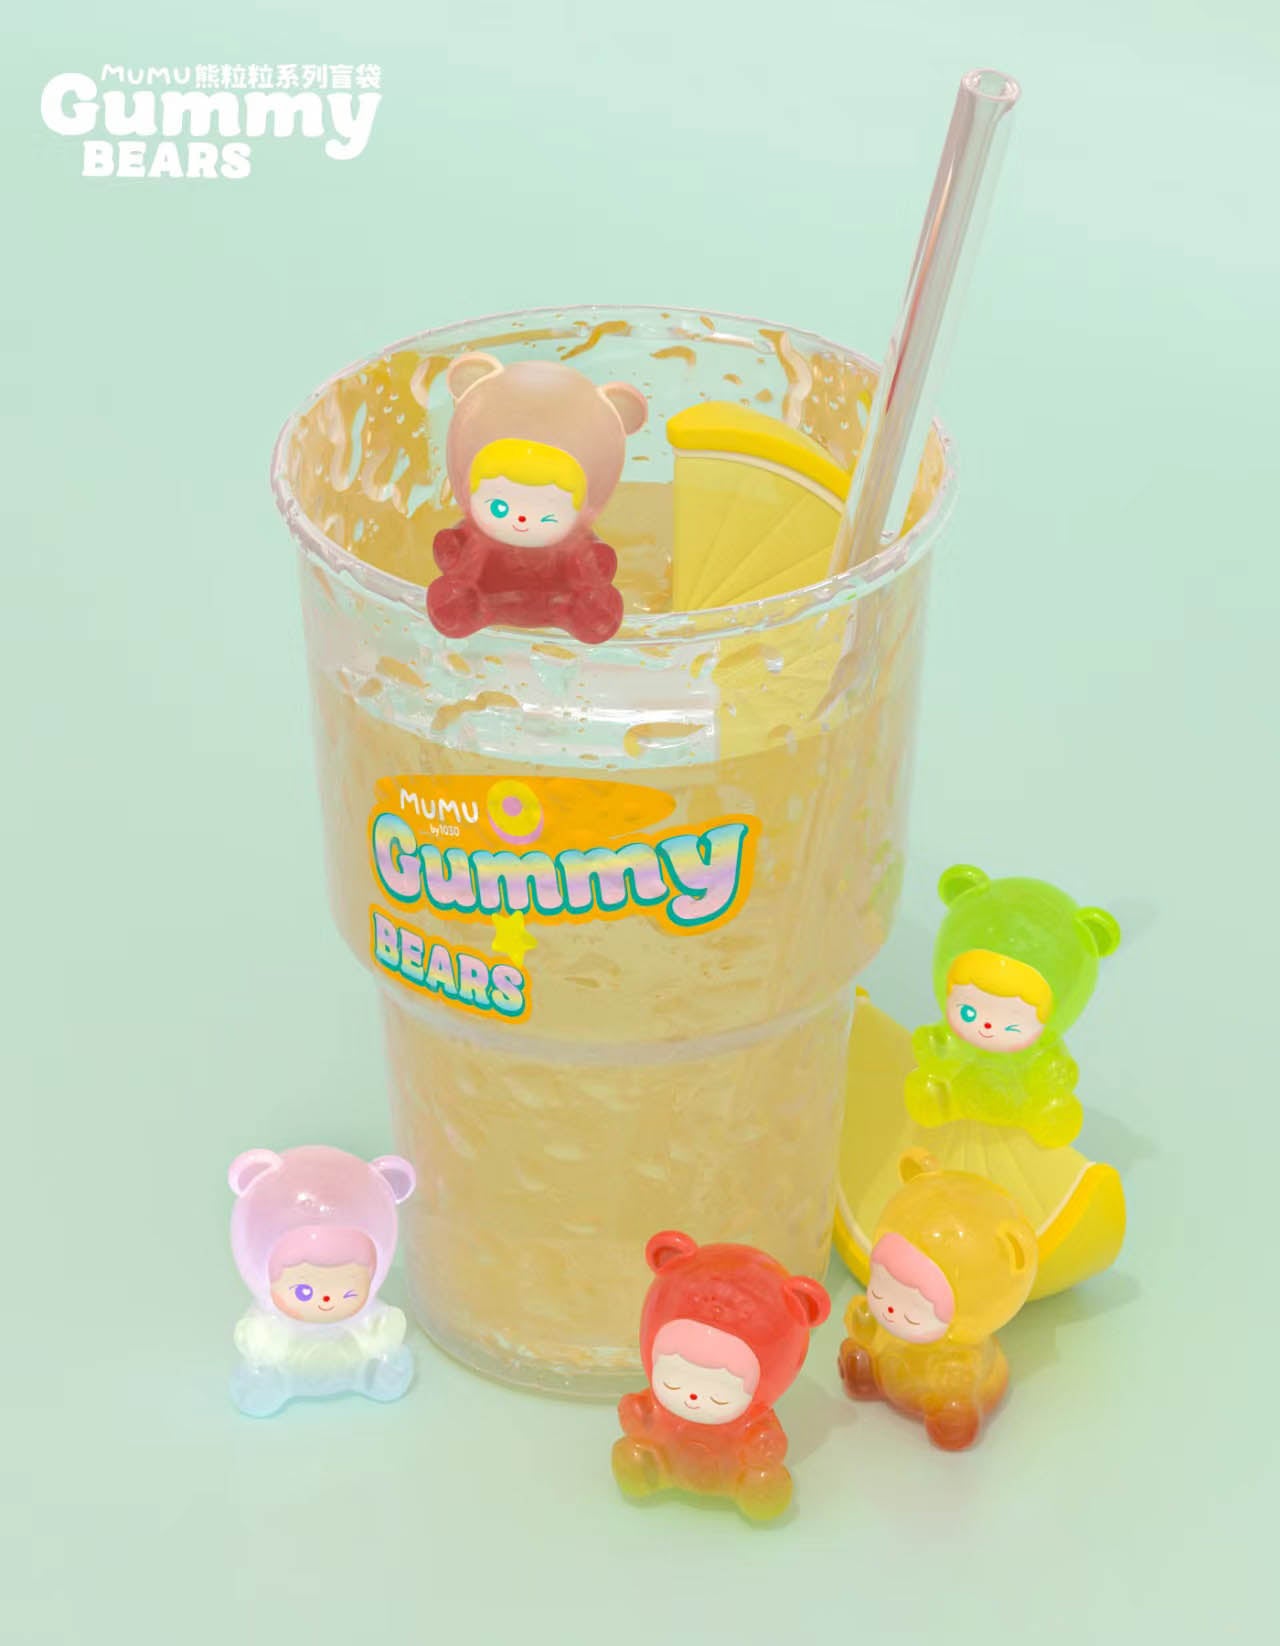 A plastic cup with a straw and toy bears, part of the MUMU Gummy Bears Blind Bag Series.